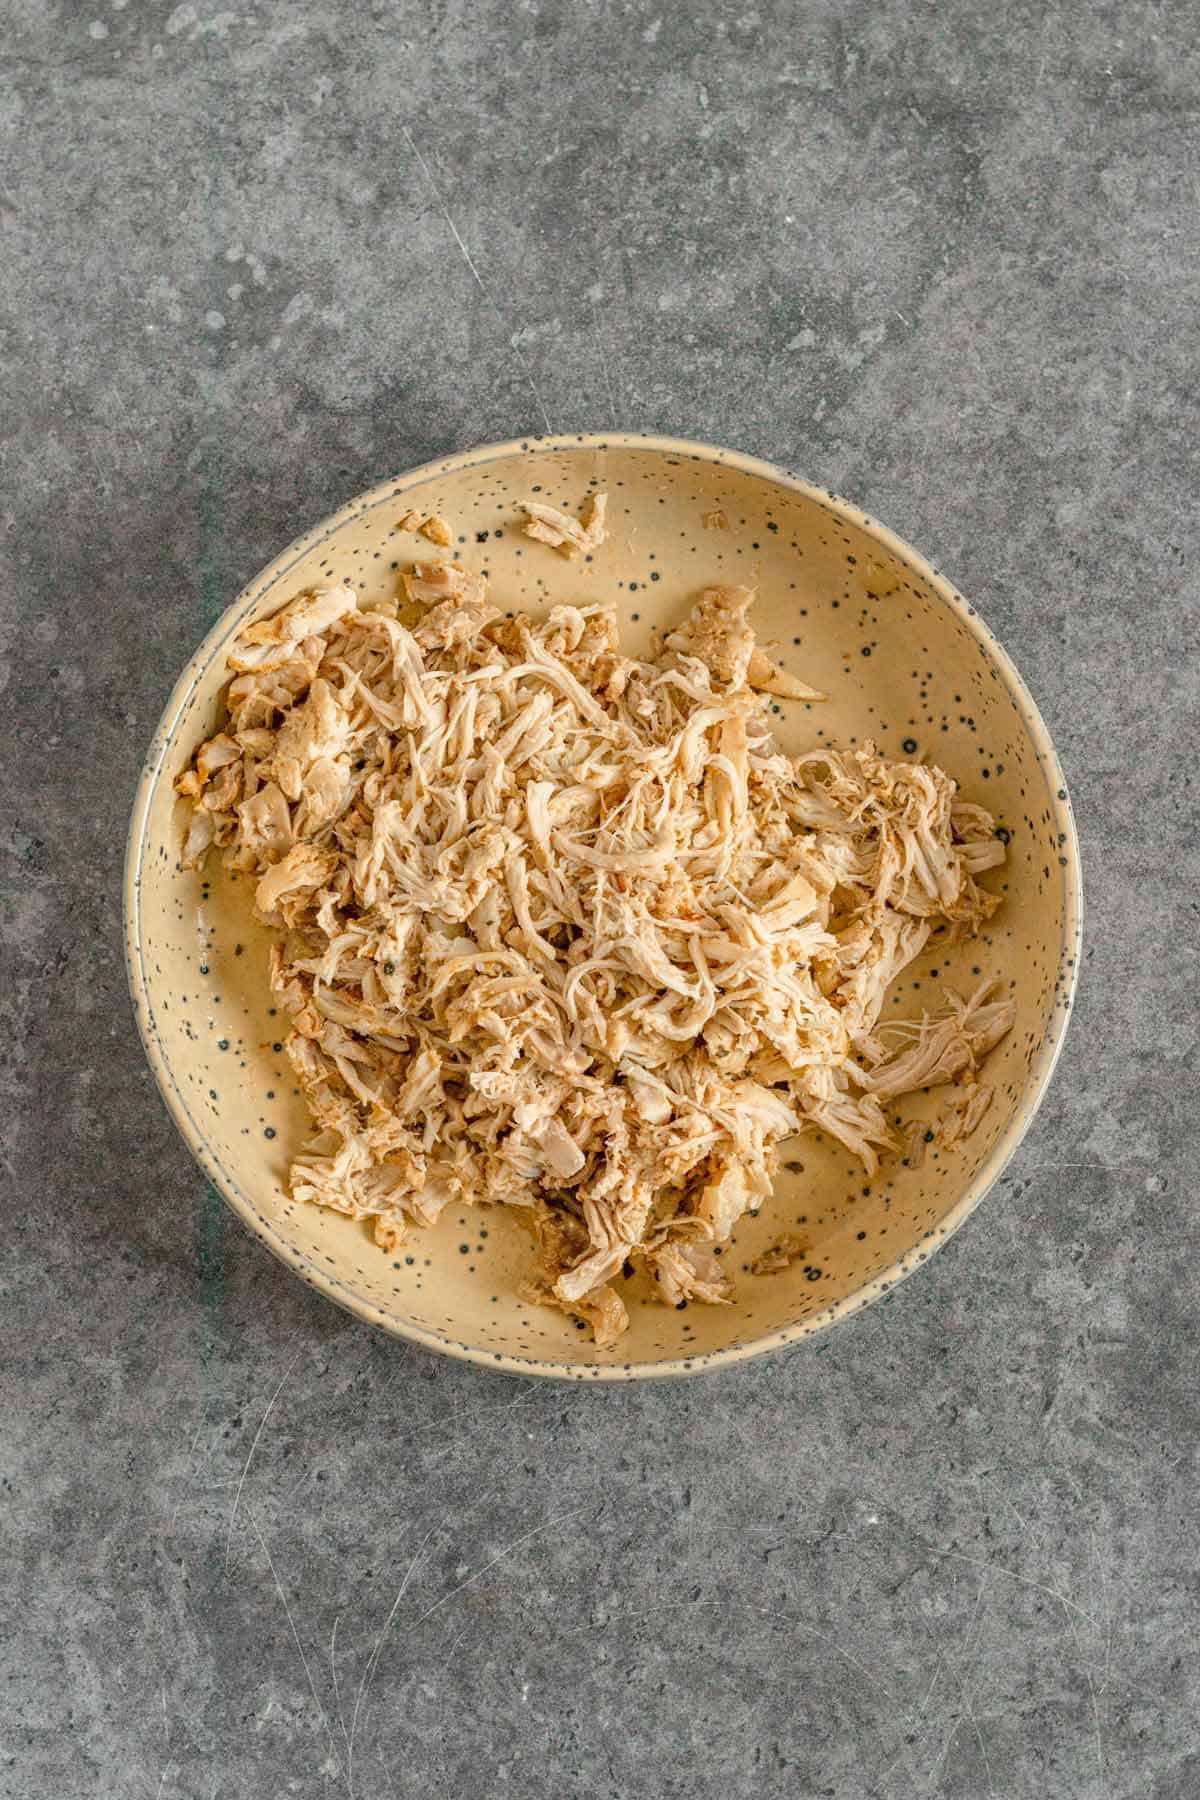 shredded chicken after slow cooking on a plate